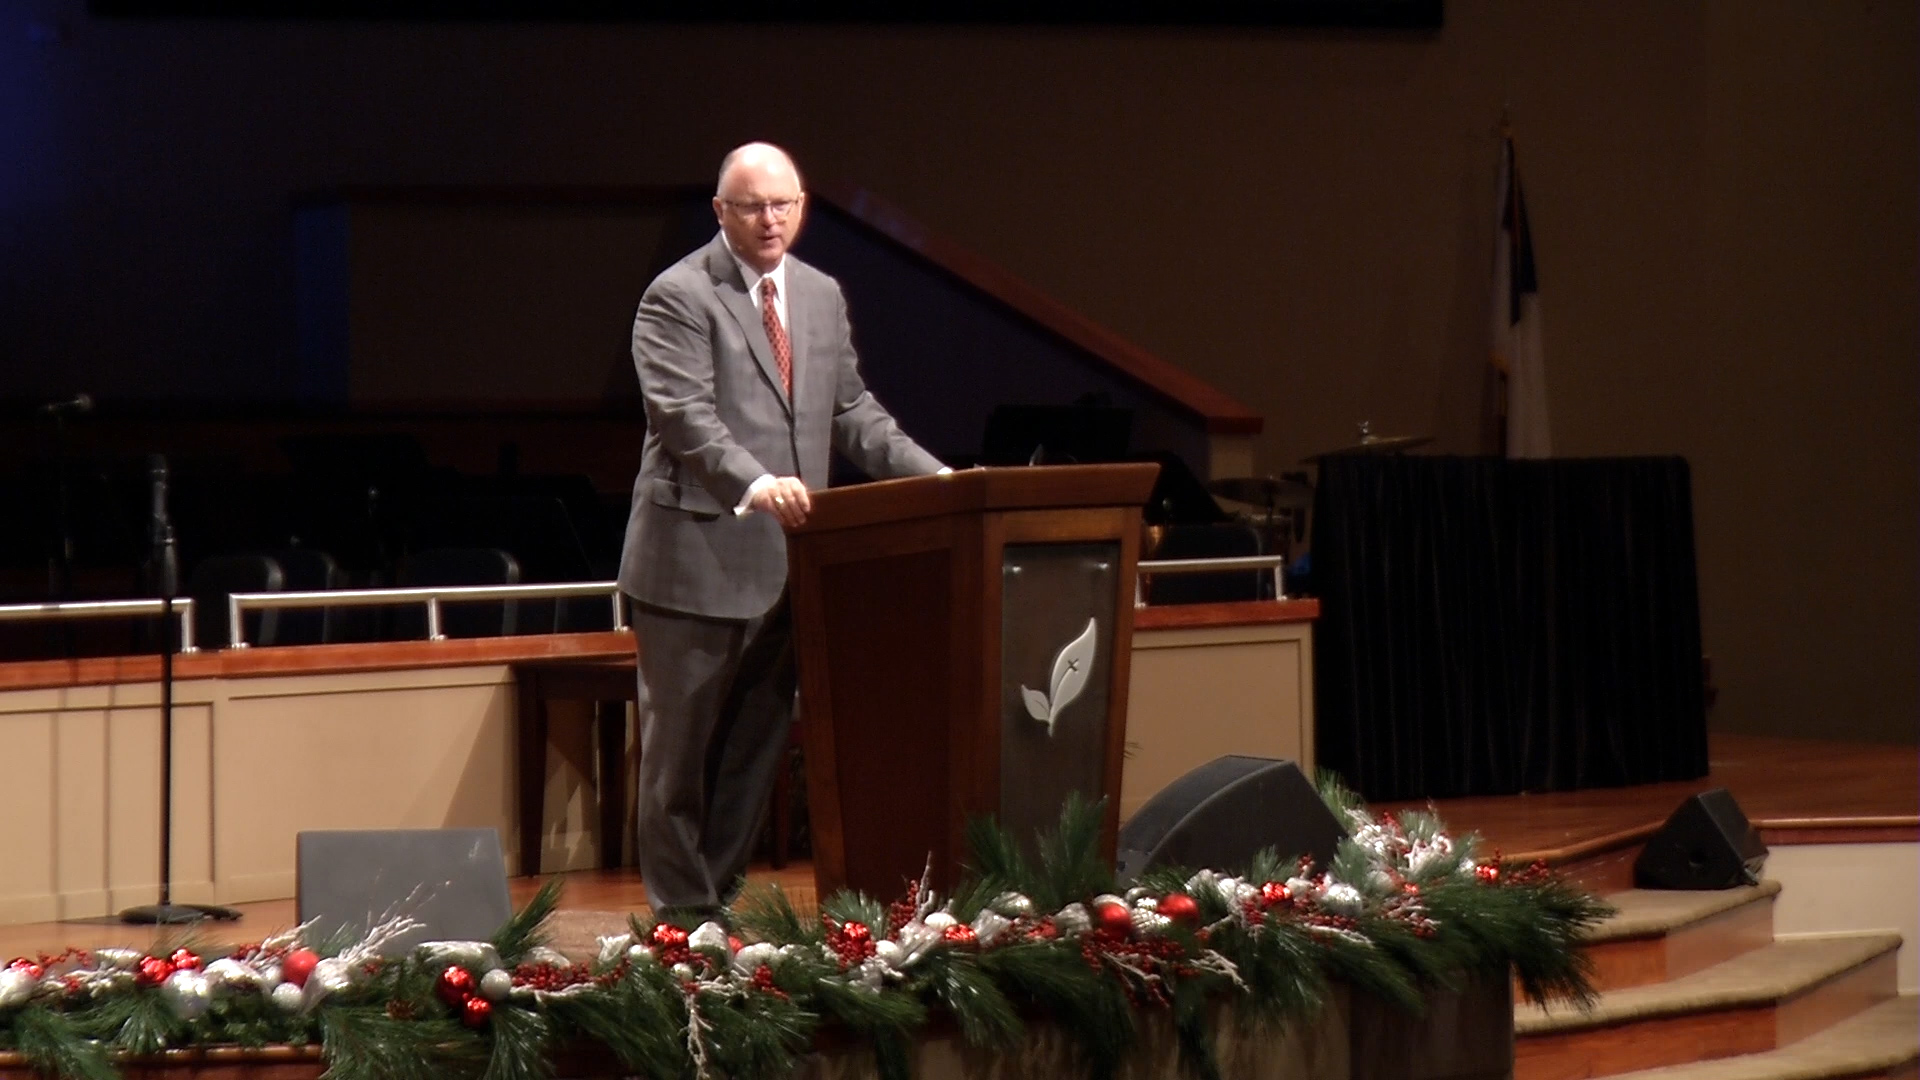 Pastor Paul Chappell: The Announcement of Grace